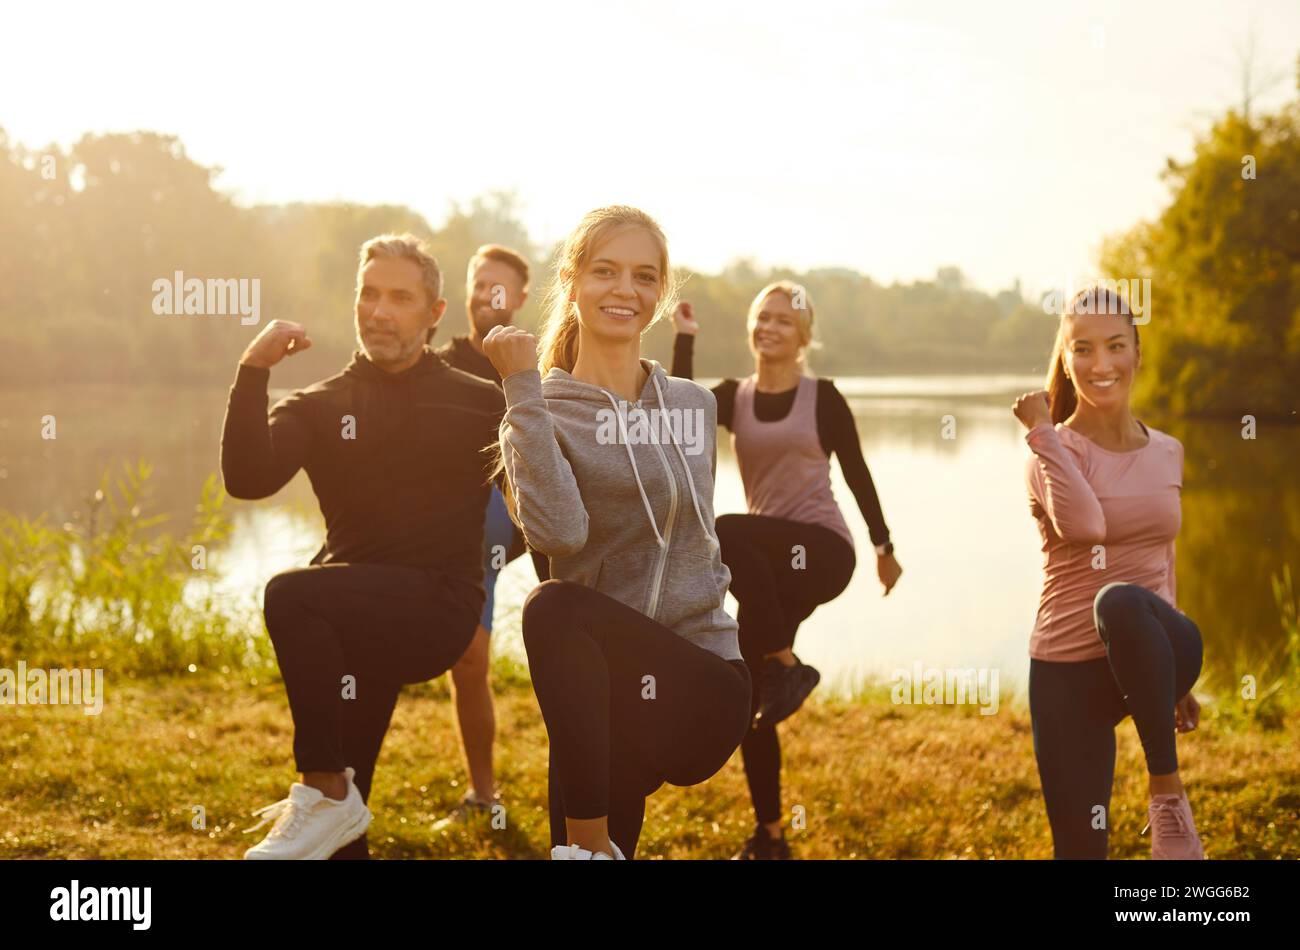 Group of fit and active people doing sport exercising in nature. Outdoors fitness concept. Stock Photo